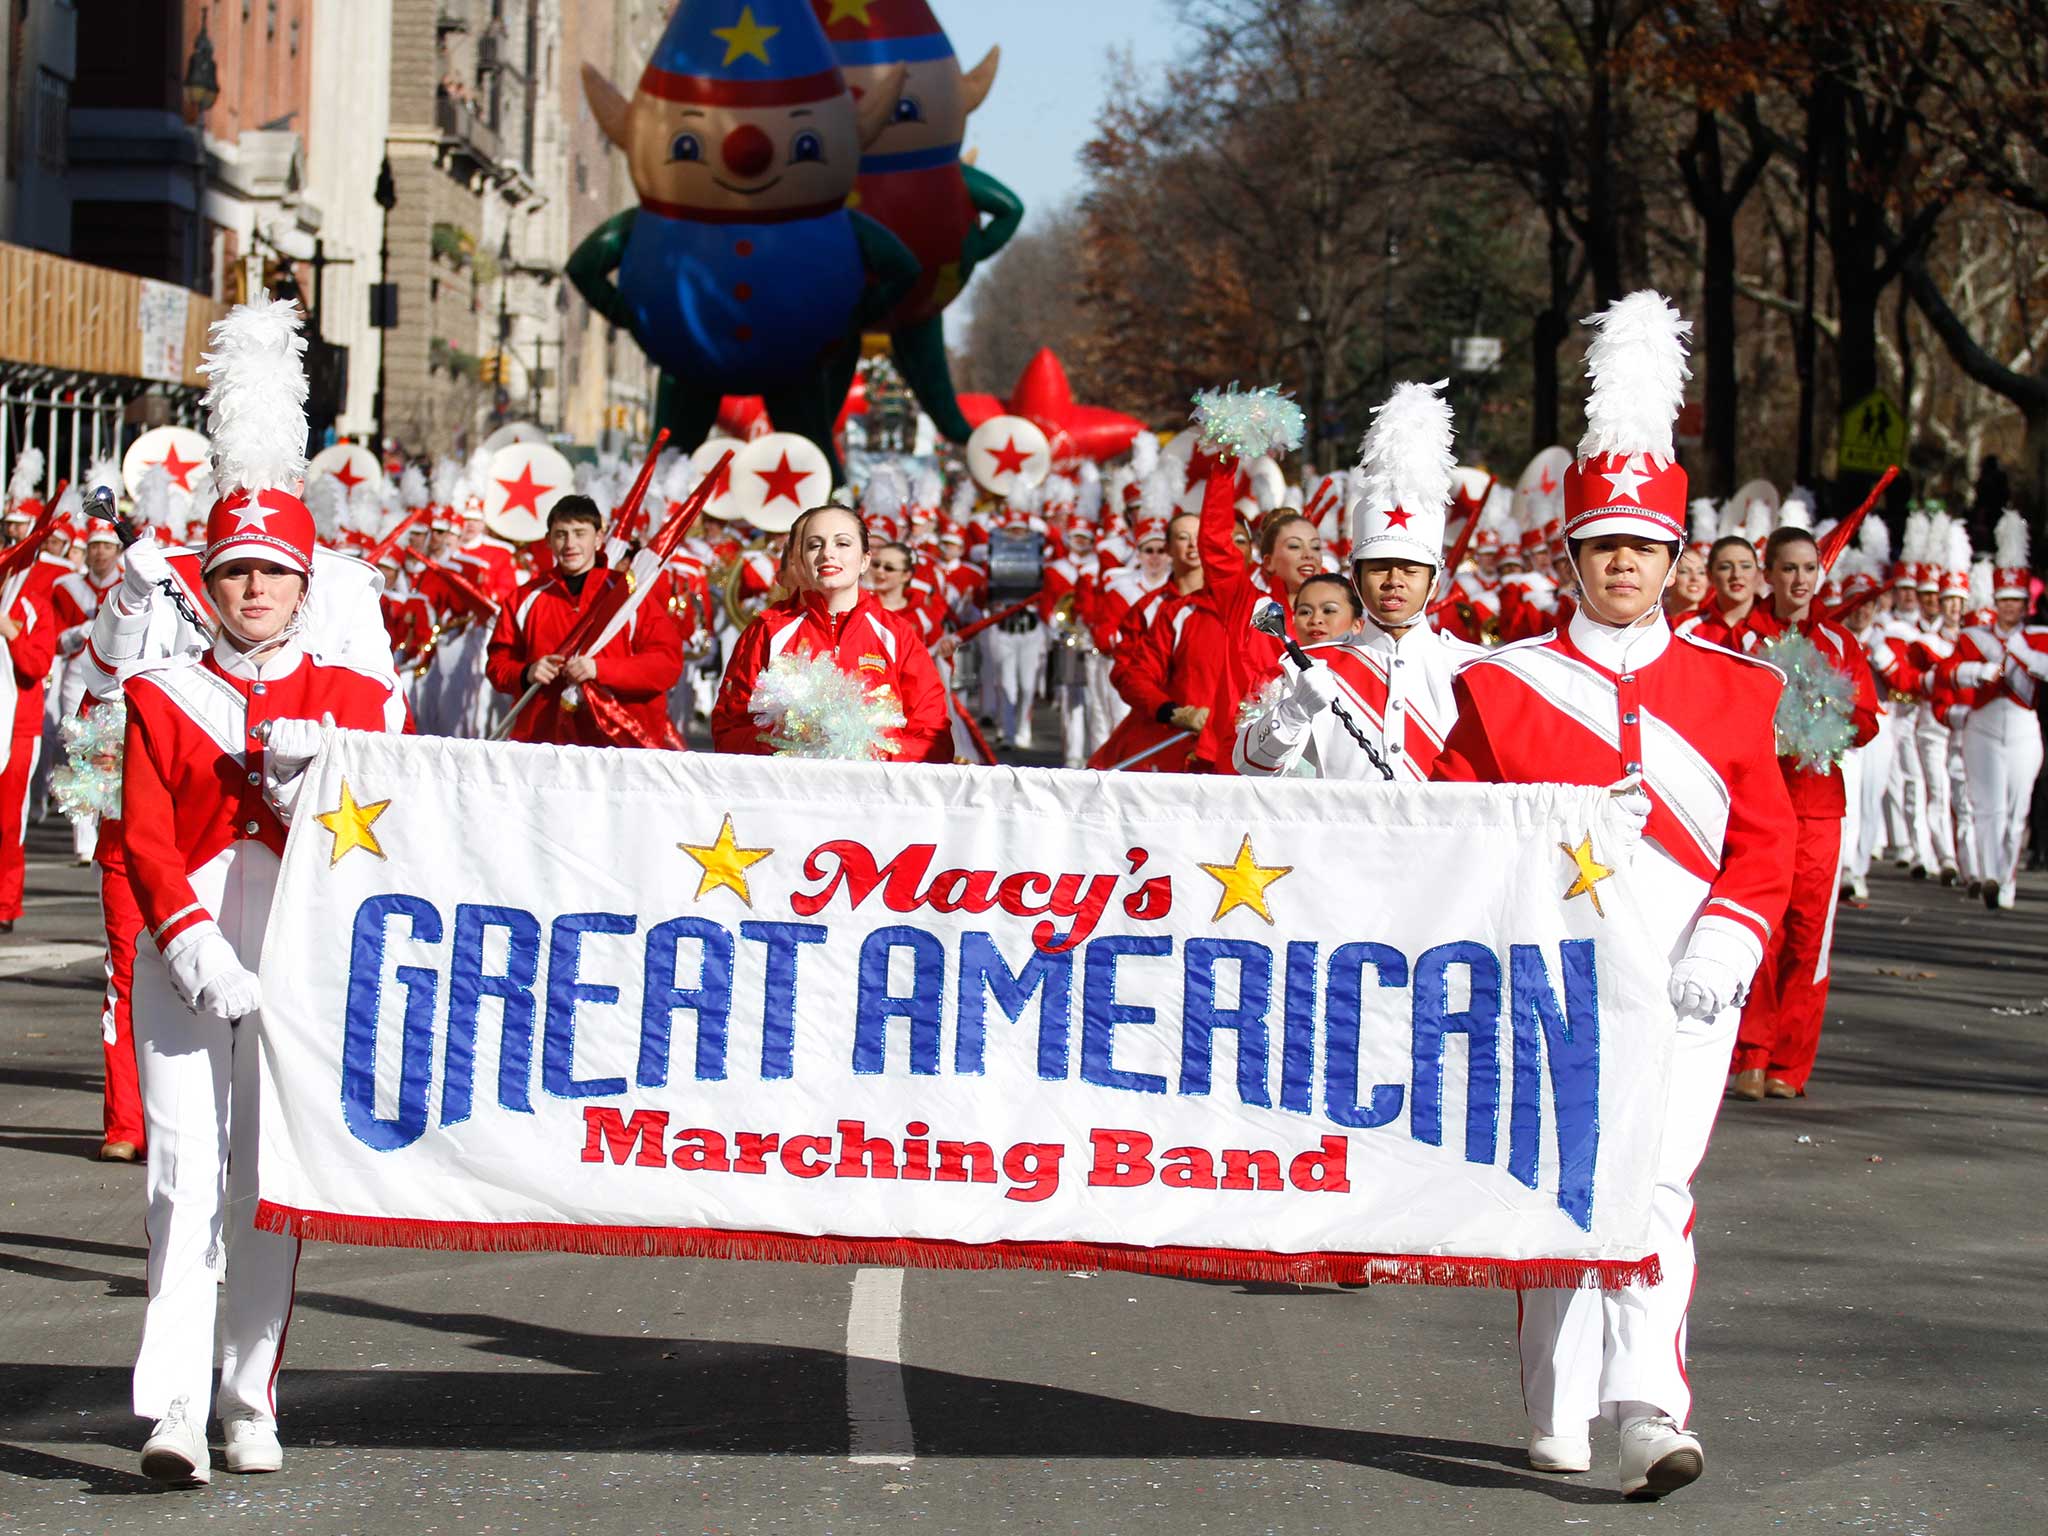 Performers in Macy's Parade on Thanksgiving